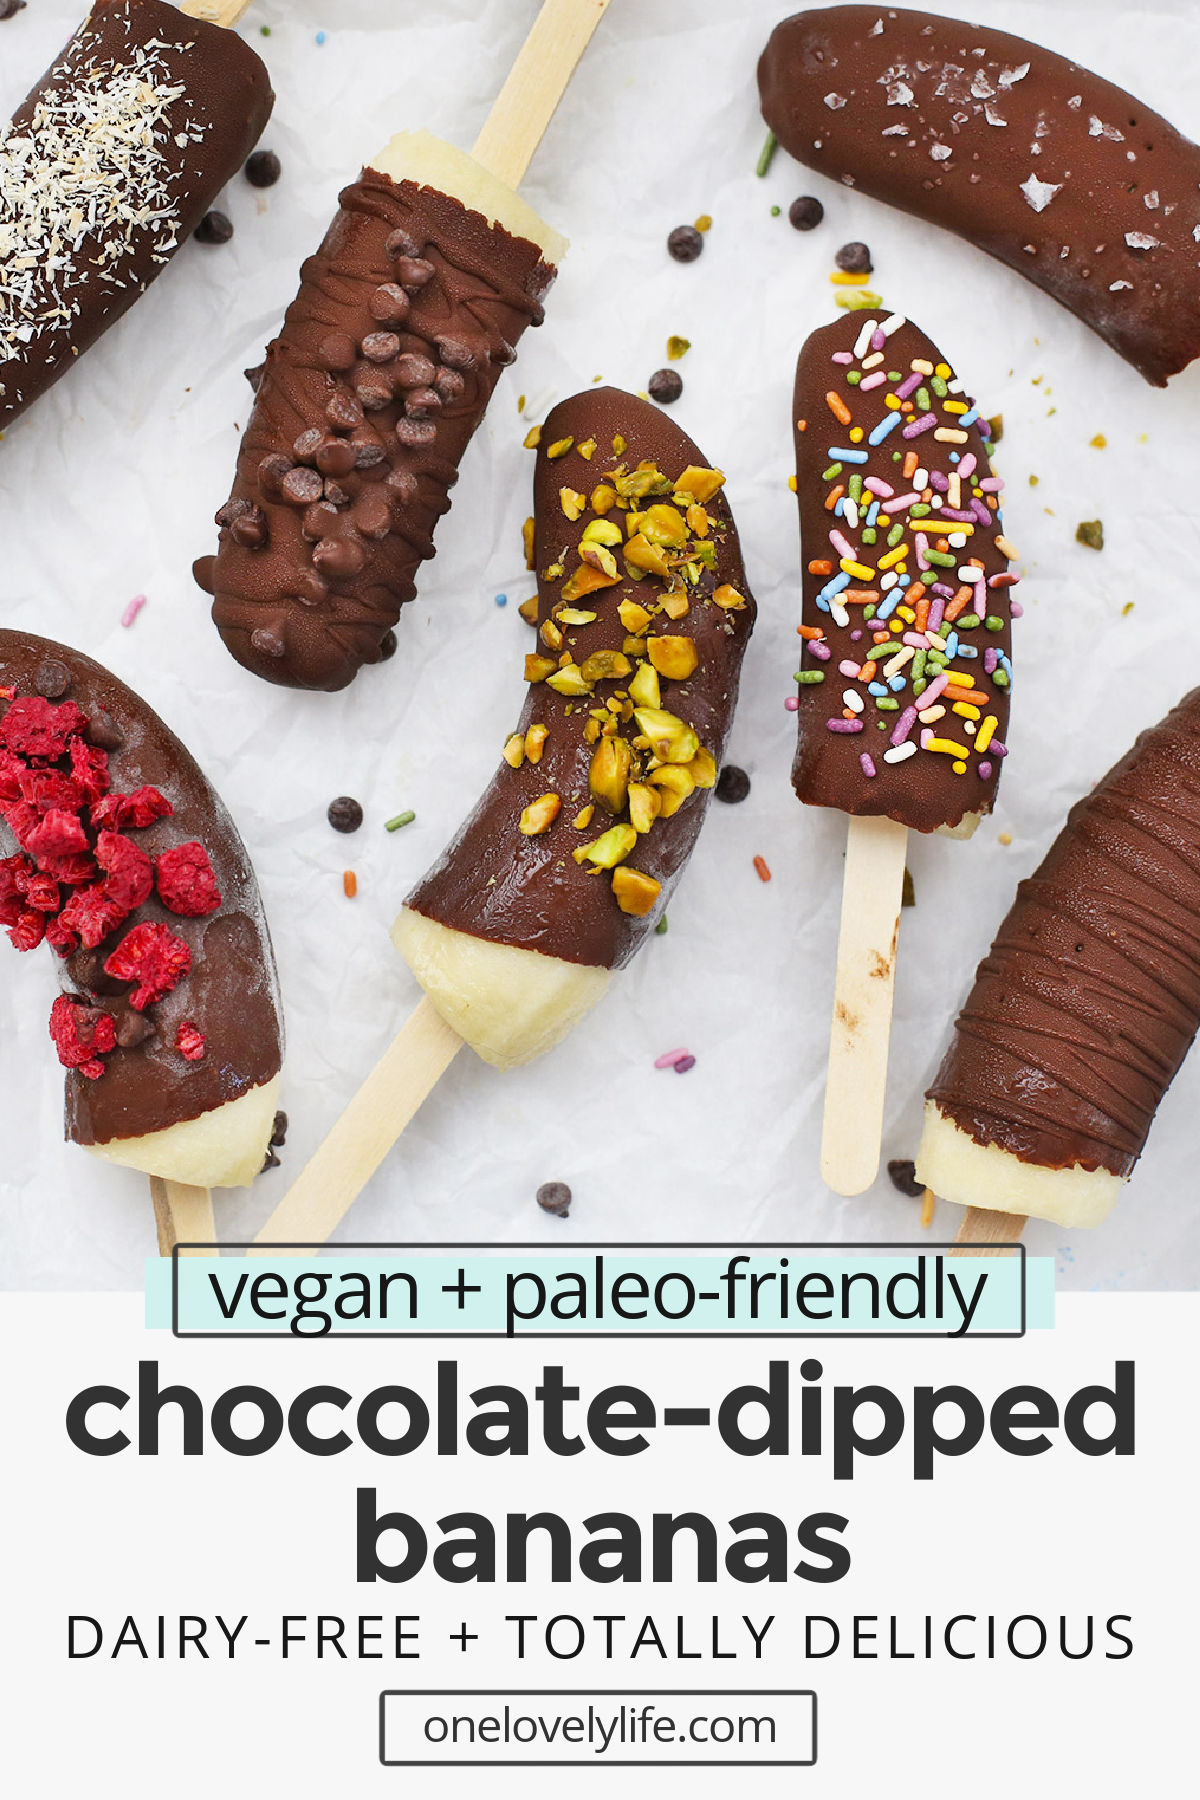 Healthy Chocolate Covered Bananas - These chocolate-dipped bananas are a delicious healthy snack or healthy dessert. Plus, they're gluten-free, vegan & paleo! // Chocolate Covered Banana Pops // Frozen Chocolate Bananas // chocolate dipped banana pops // healthy snack / healthy dessert / disneyland frozen bananas / healthy treat / healthy popsicle / kid friendly snack / summer snack / frozen bananas / paleo / vegan / gluten free